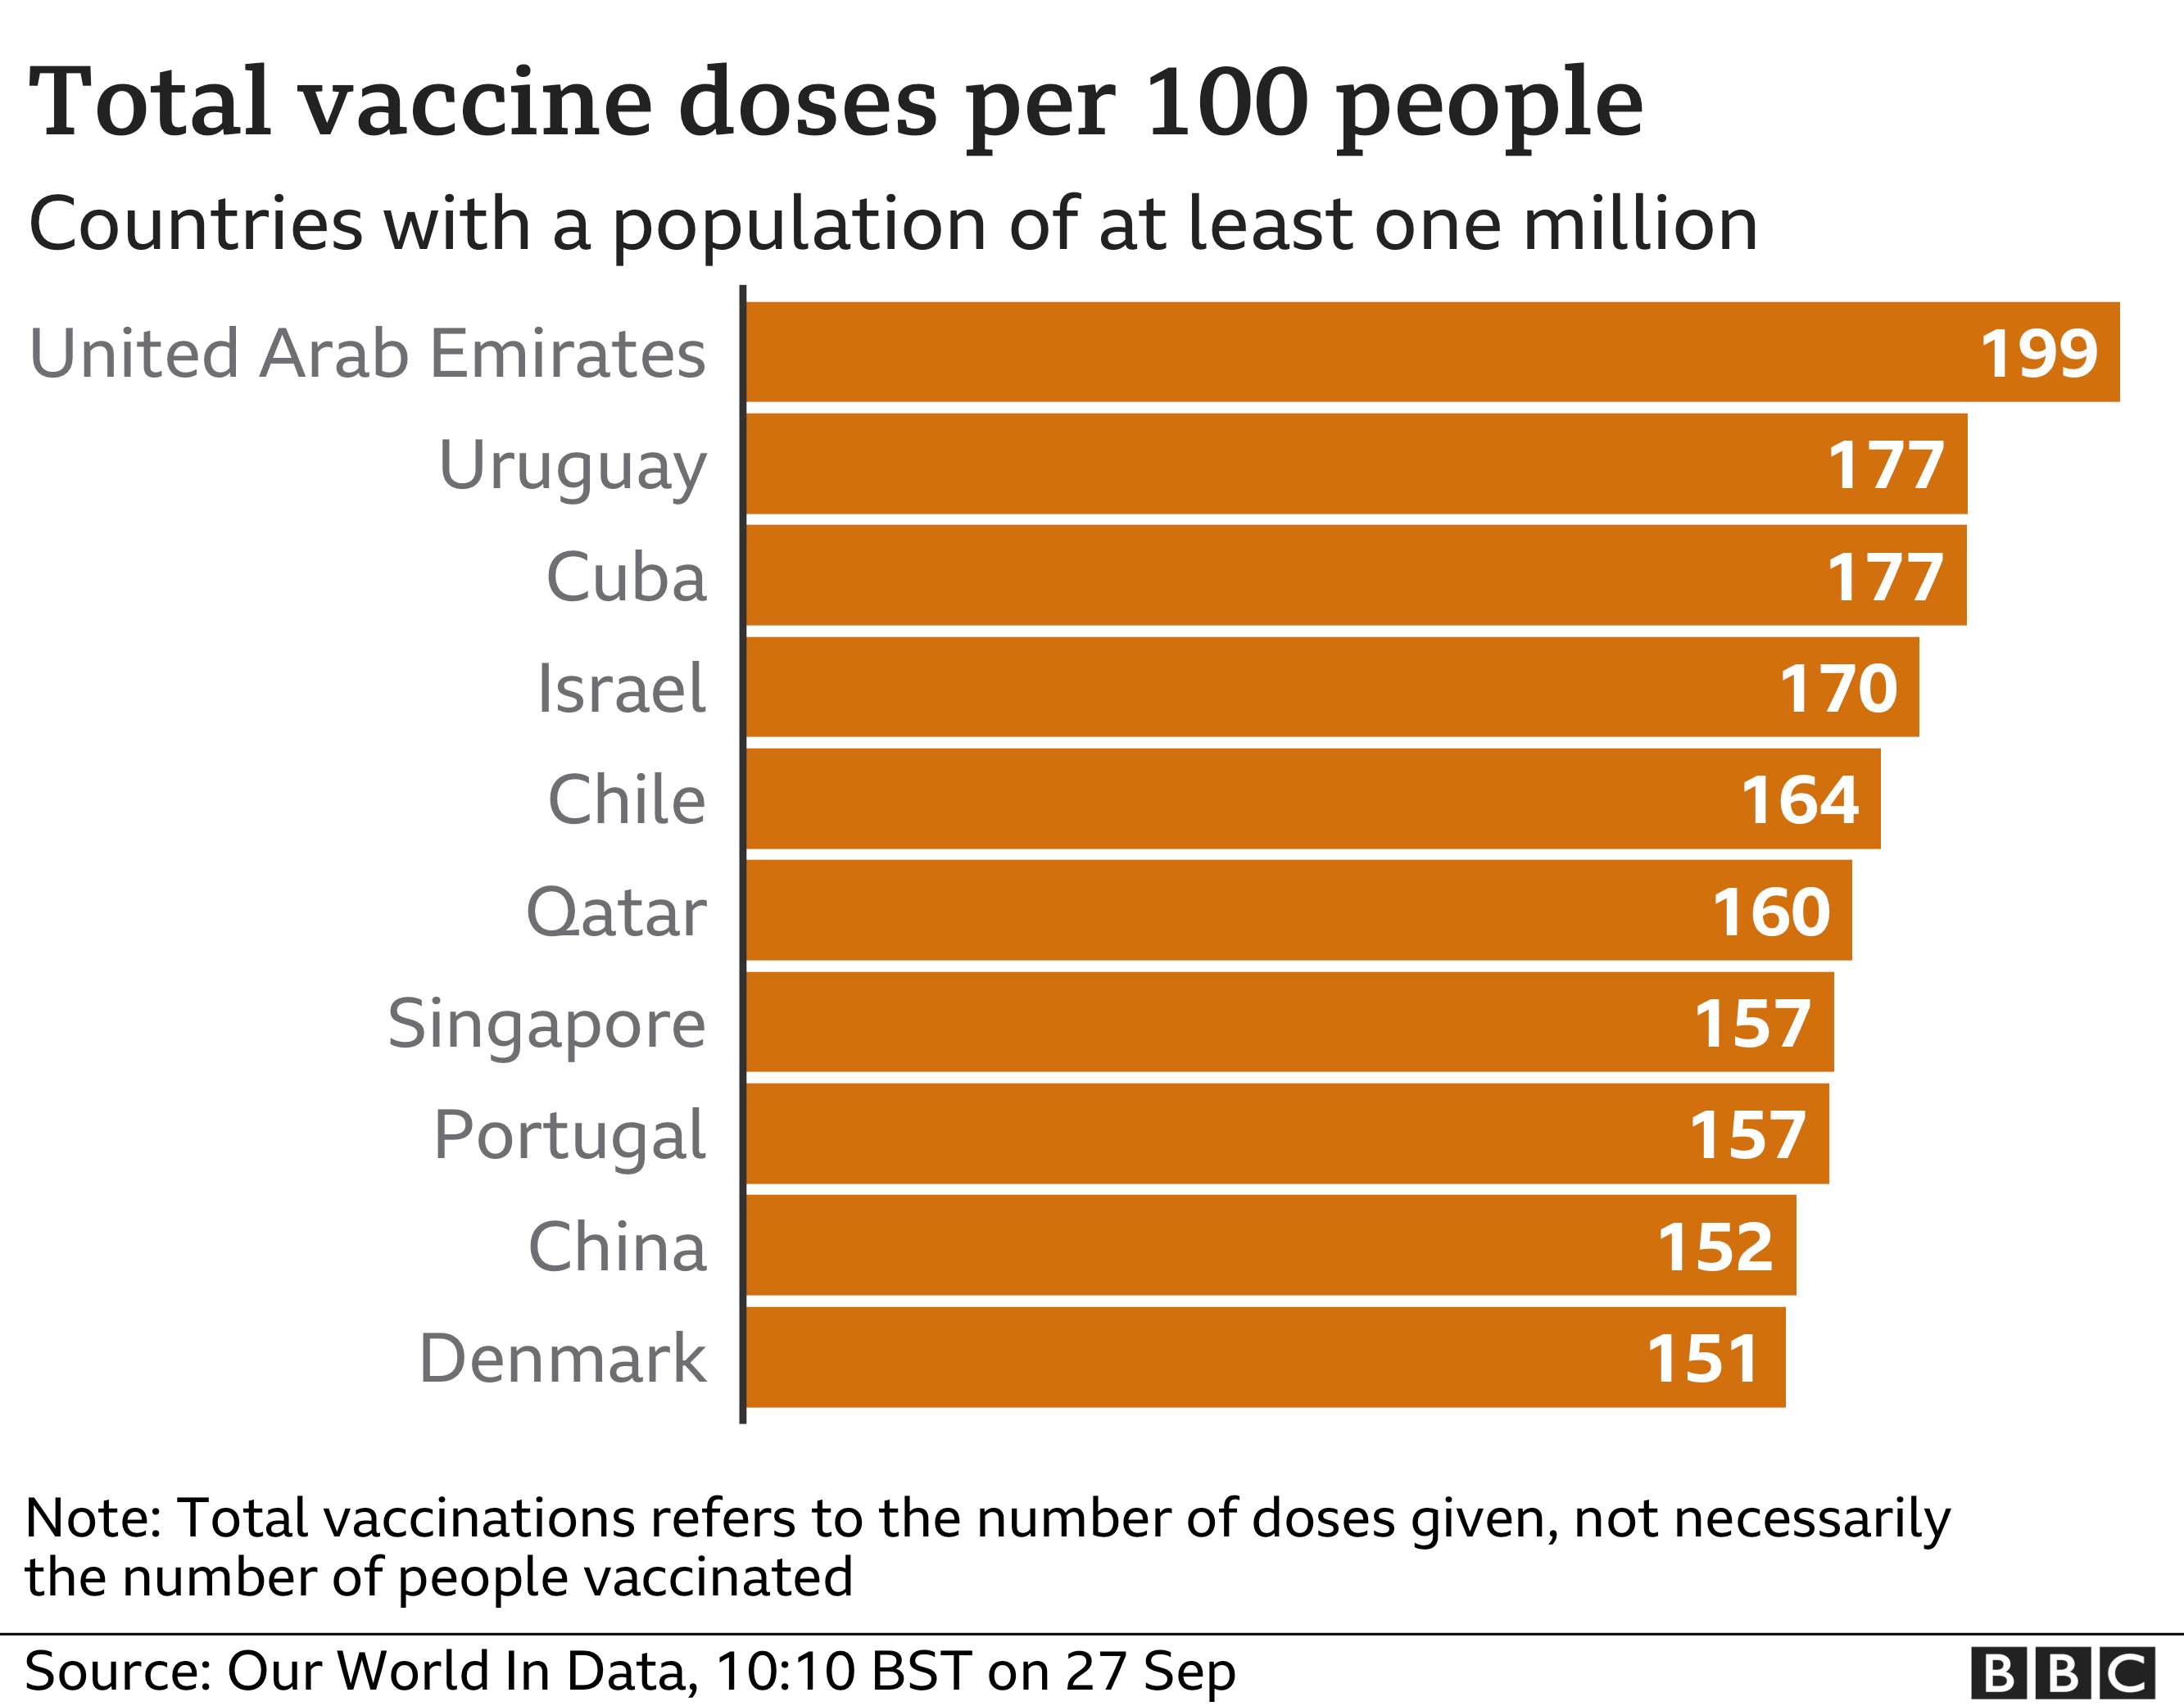 Chart showing vaccine doses per 100 people in countries where the population is over one million. Updated 27 September.